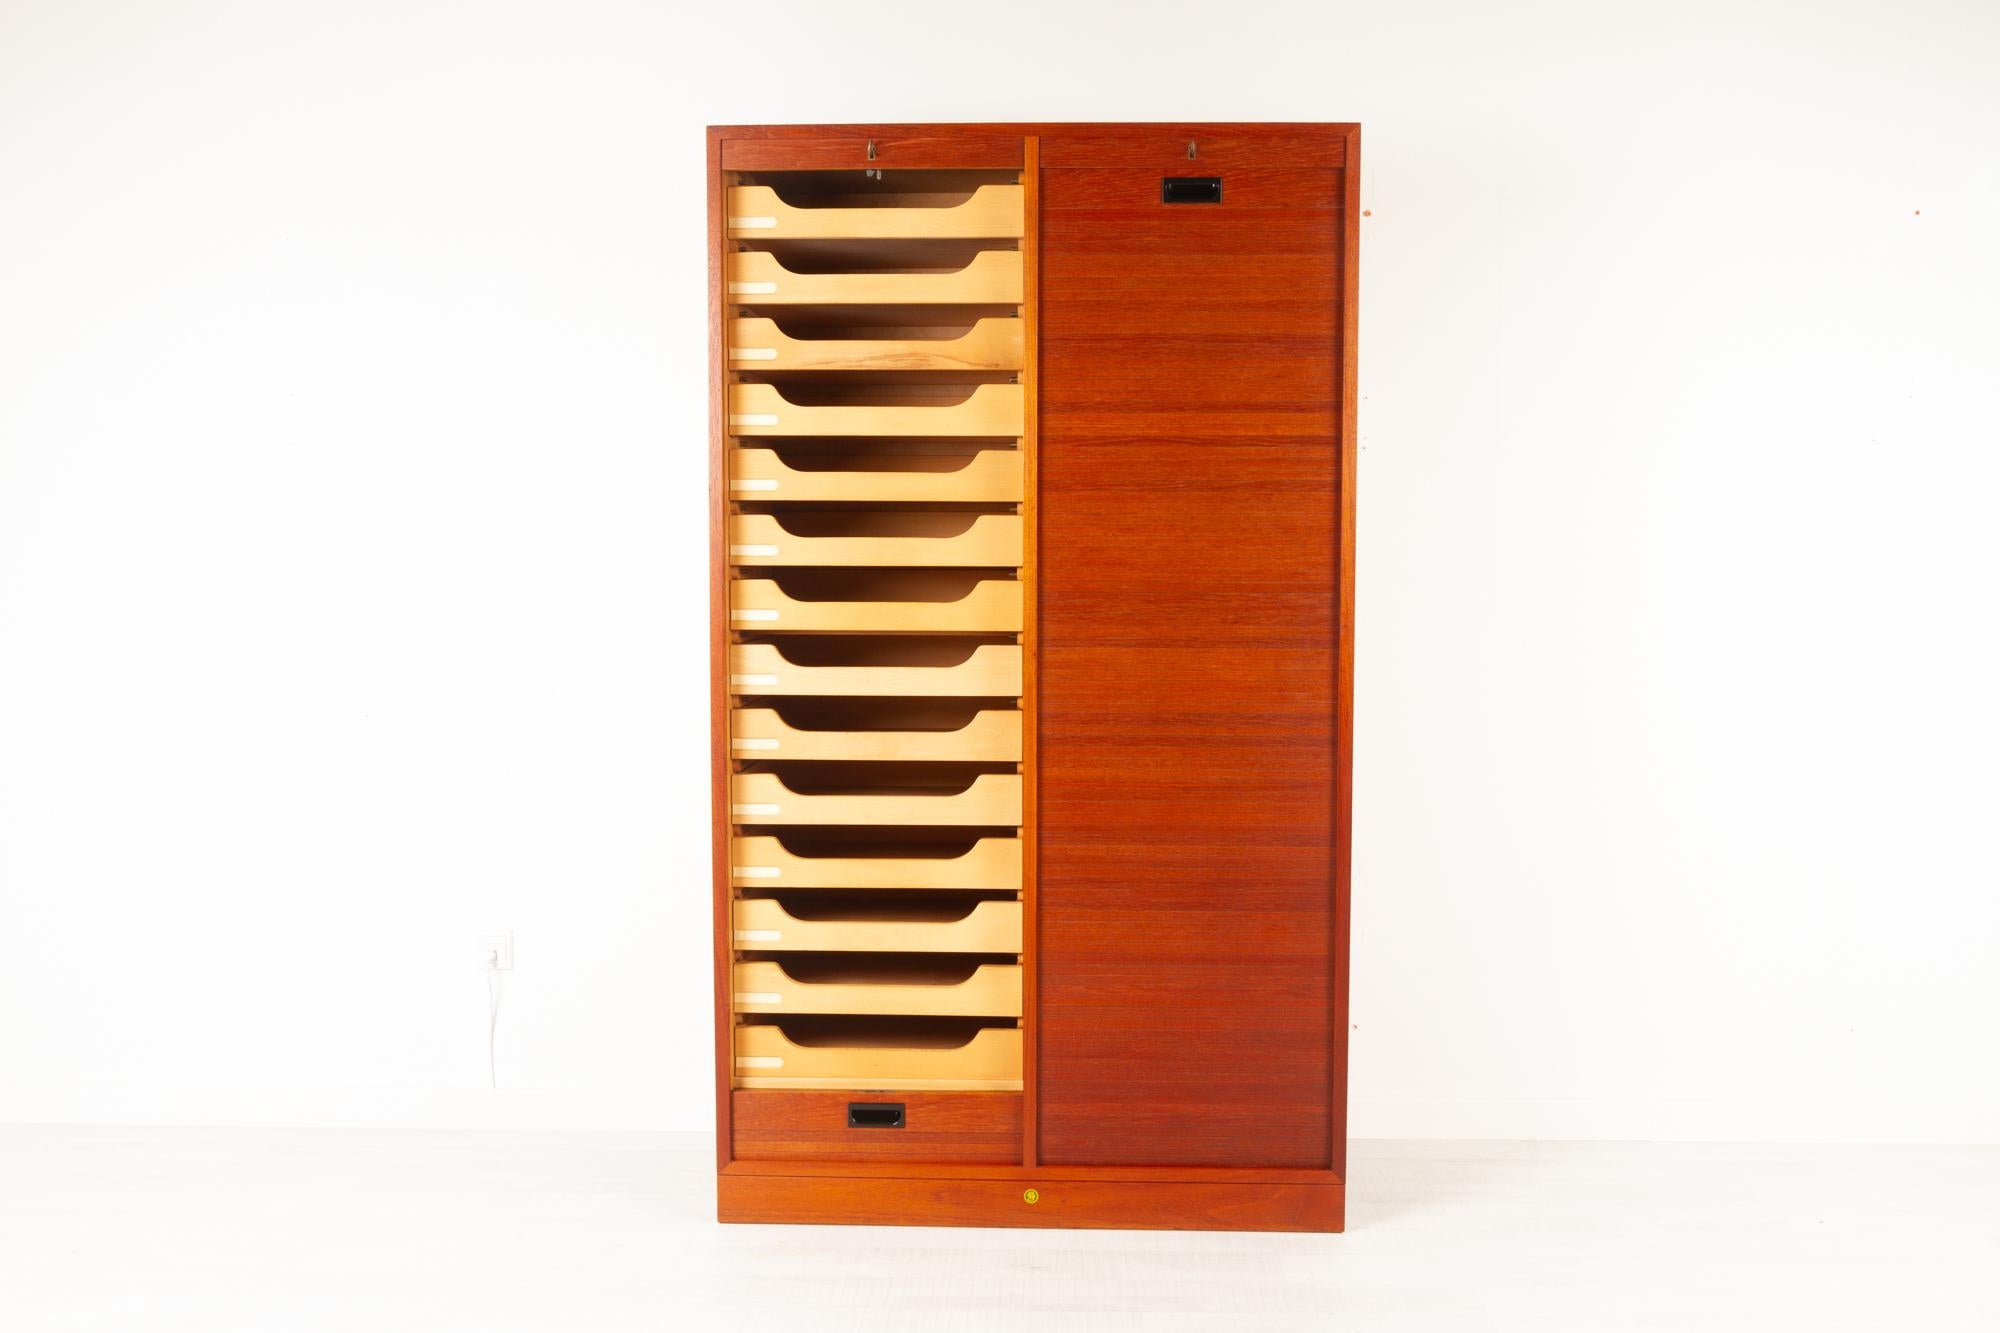 Vintage Danish teak cabinet with tambour doors, 1960s
Danish modern large double filing cabinet with vertical sliding tambour front in teak made by Bjerringbro Savværk in Denmark. Two separate compartments, one with 14 drawers and one with three